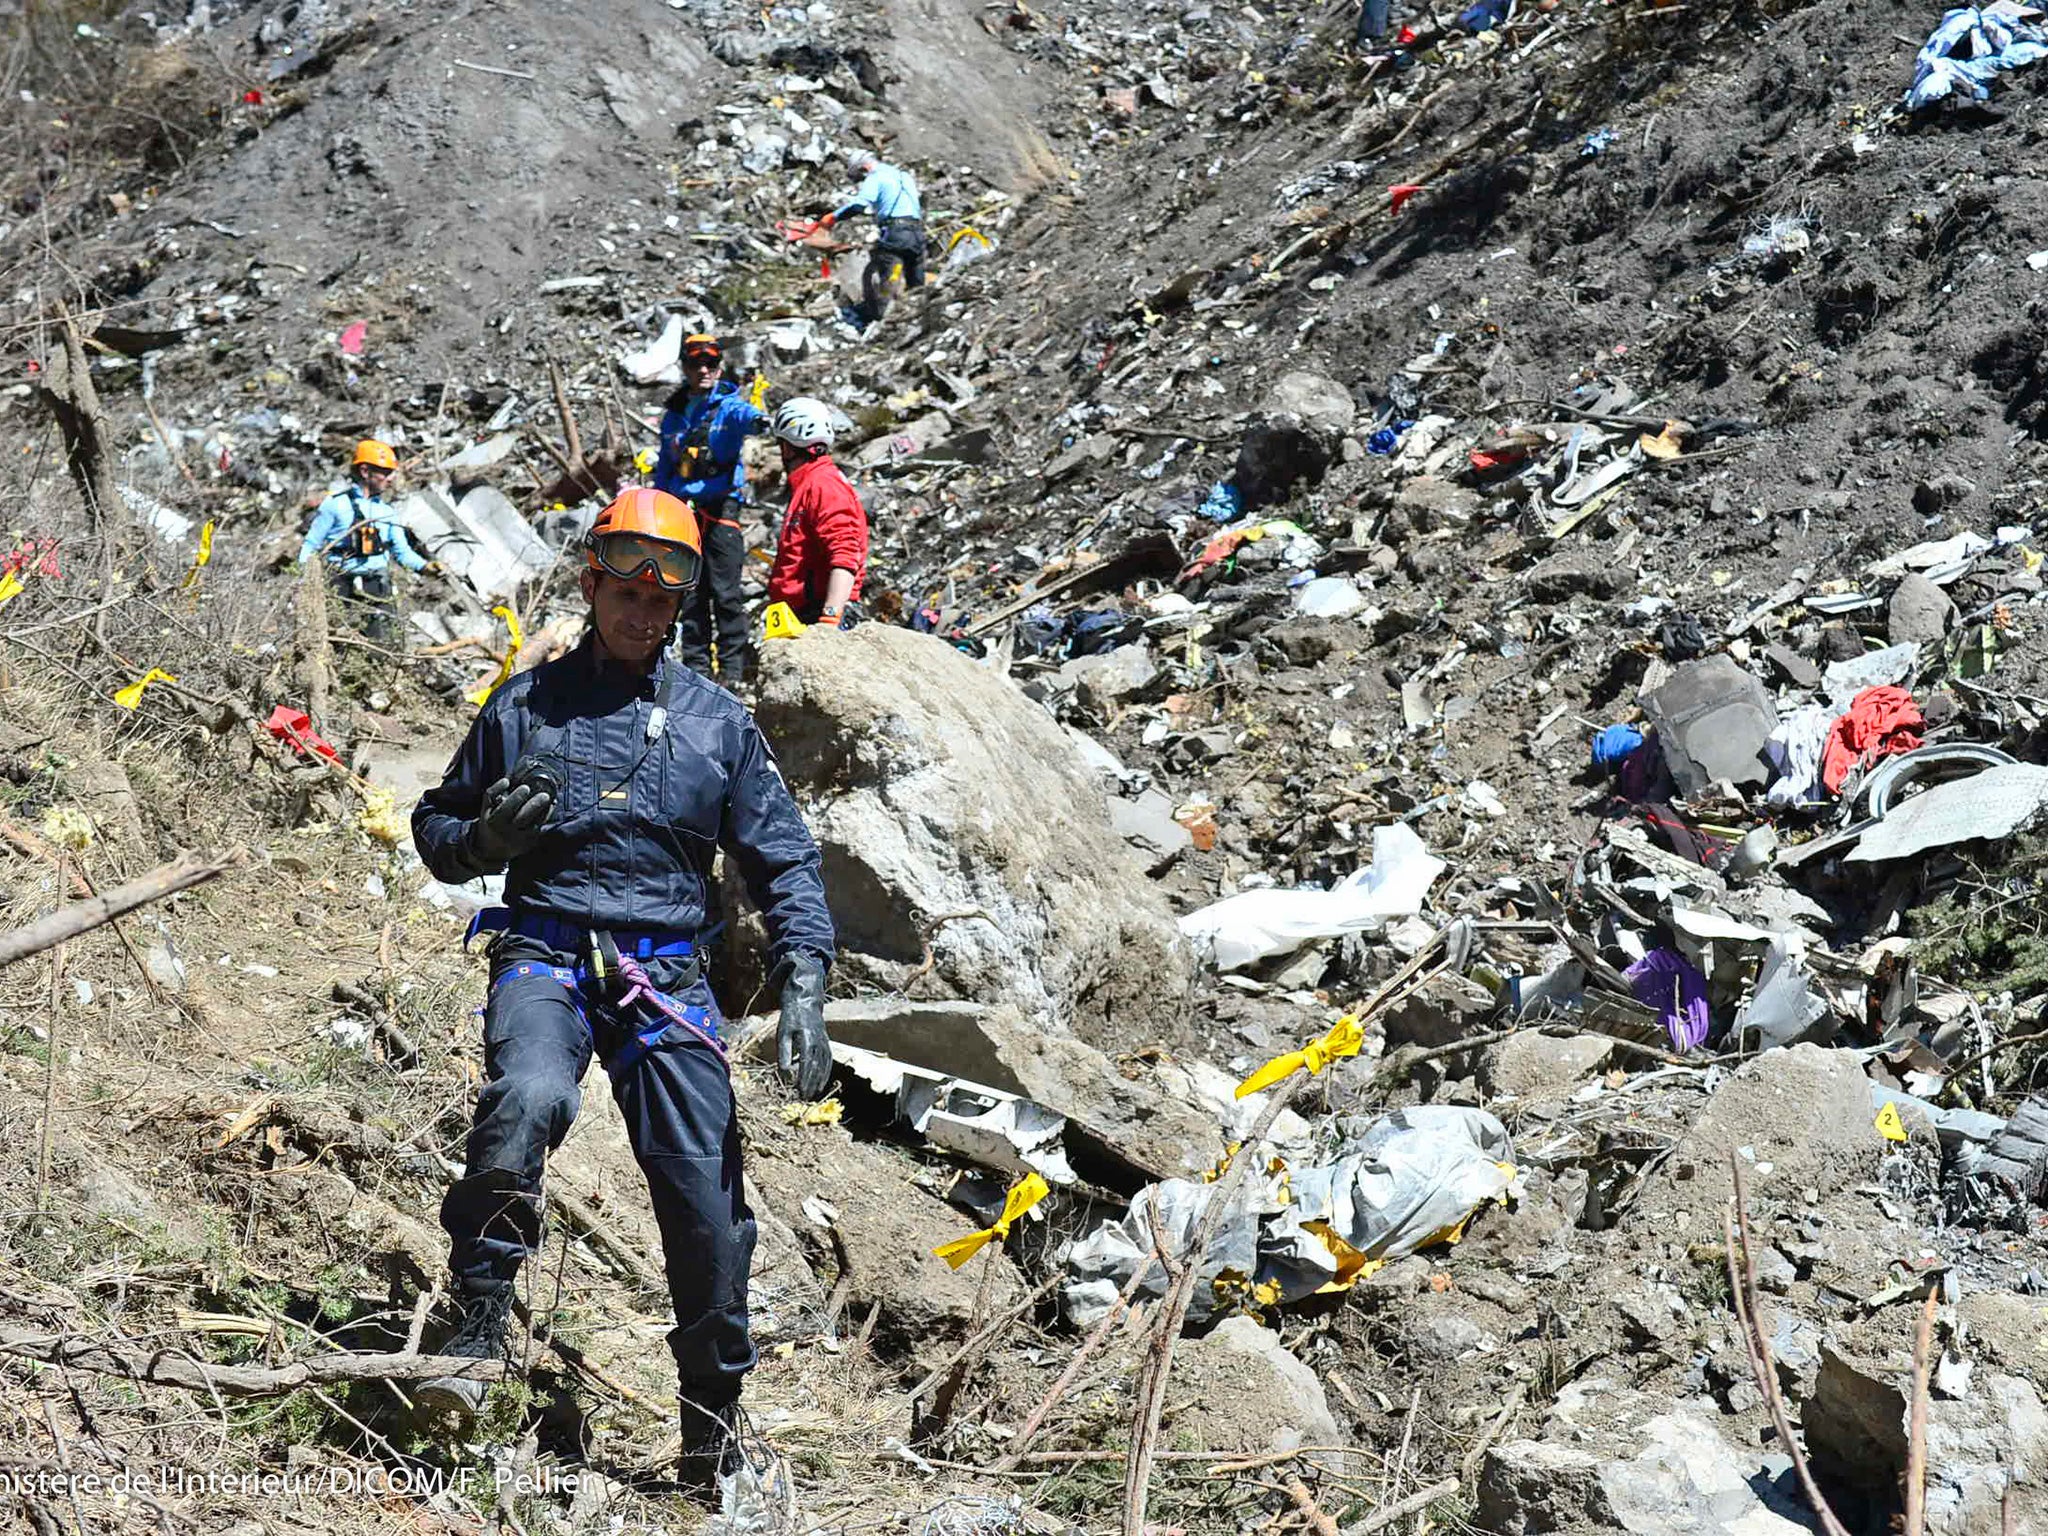 Search and rescue workers collecting debris at the crash site in the French Alps